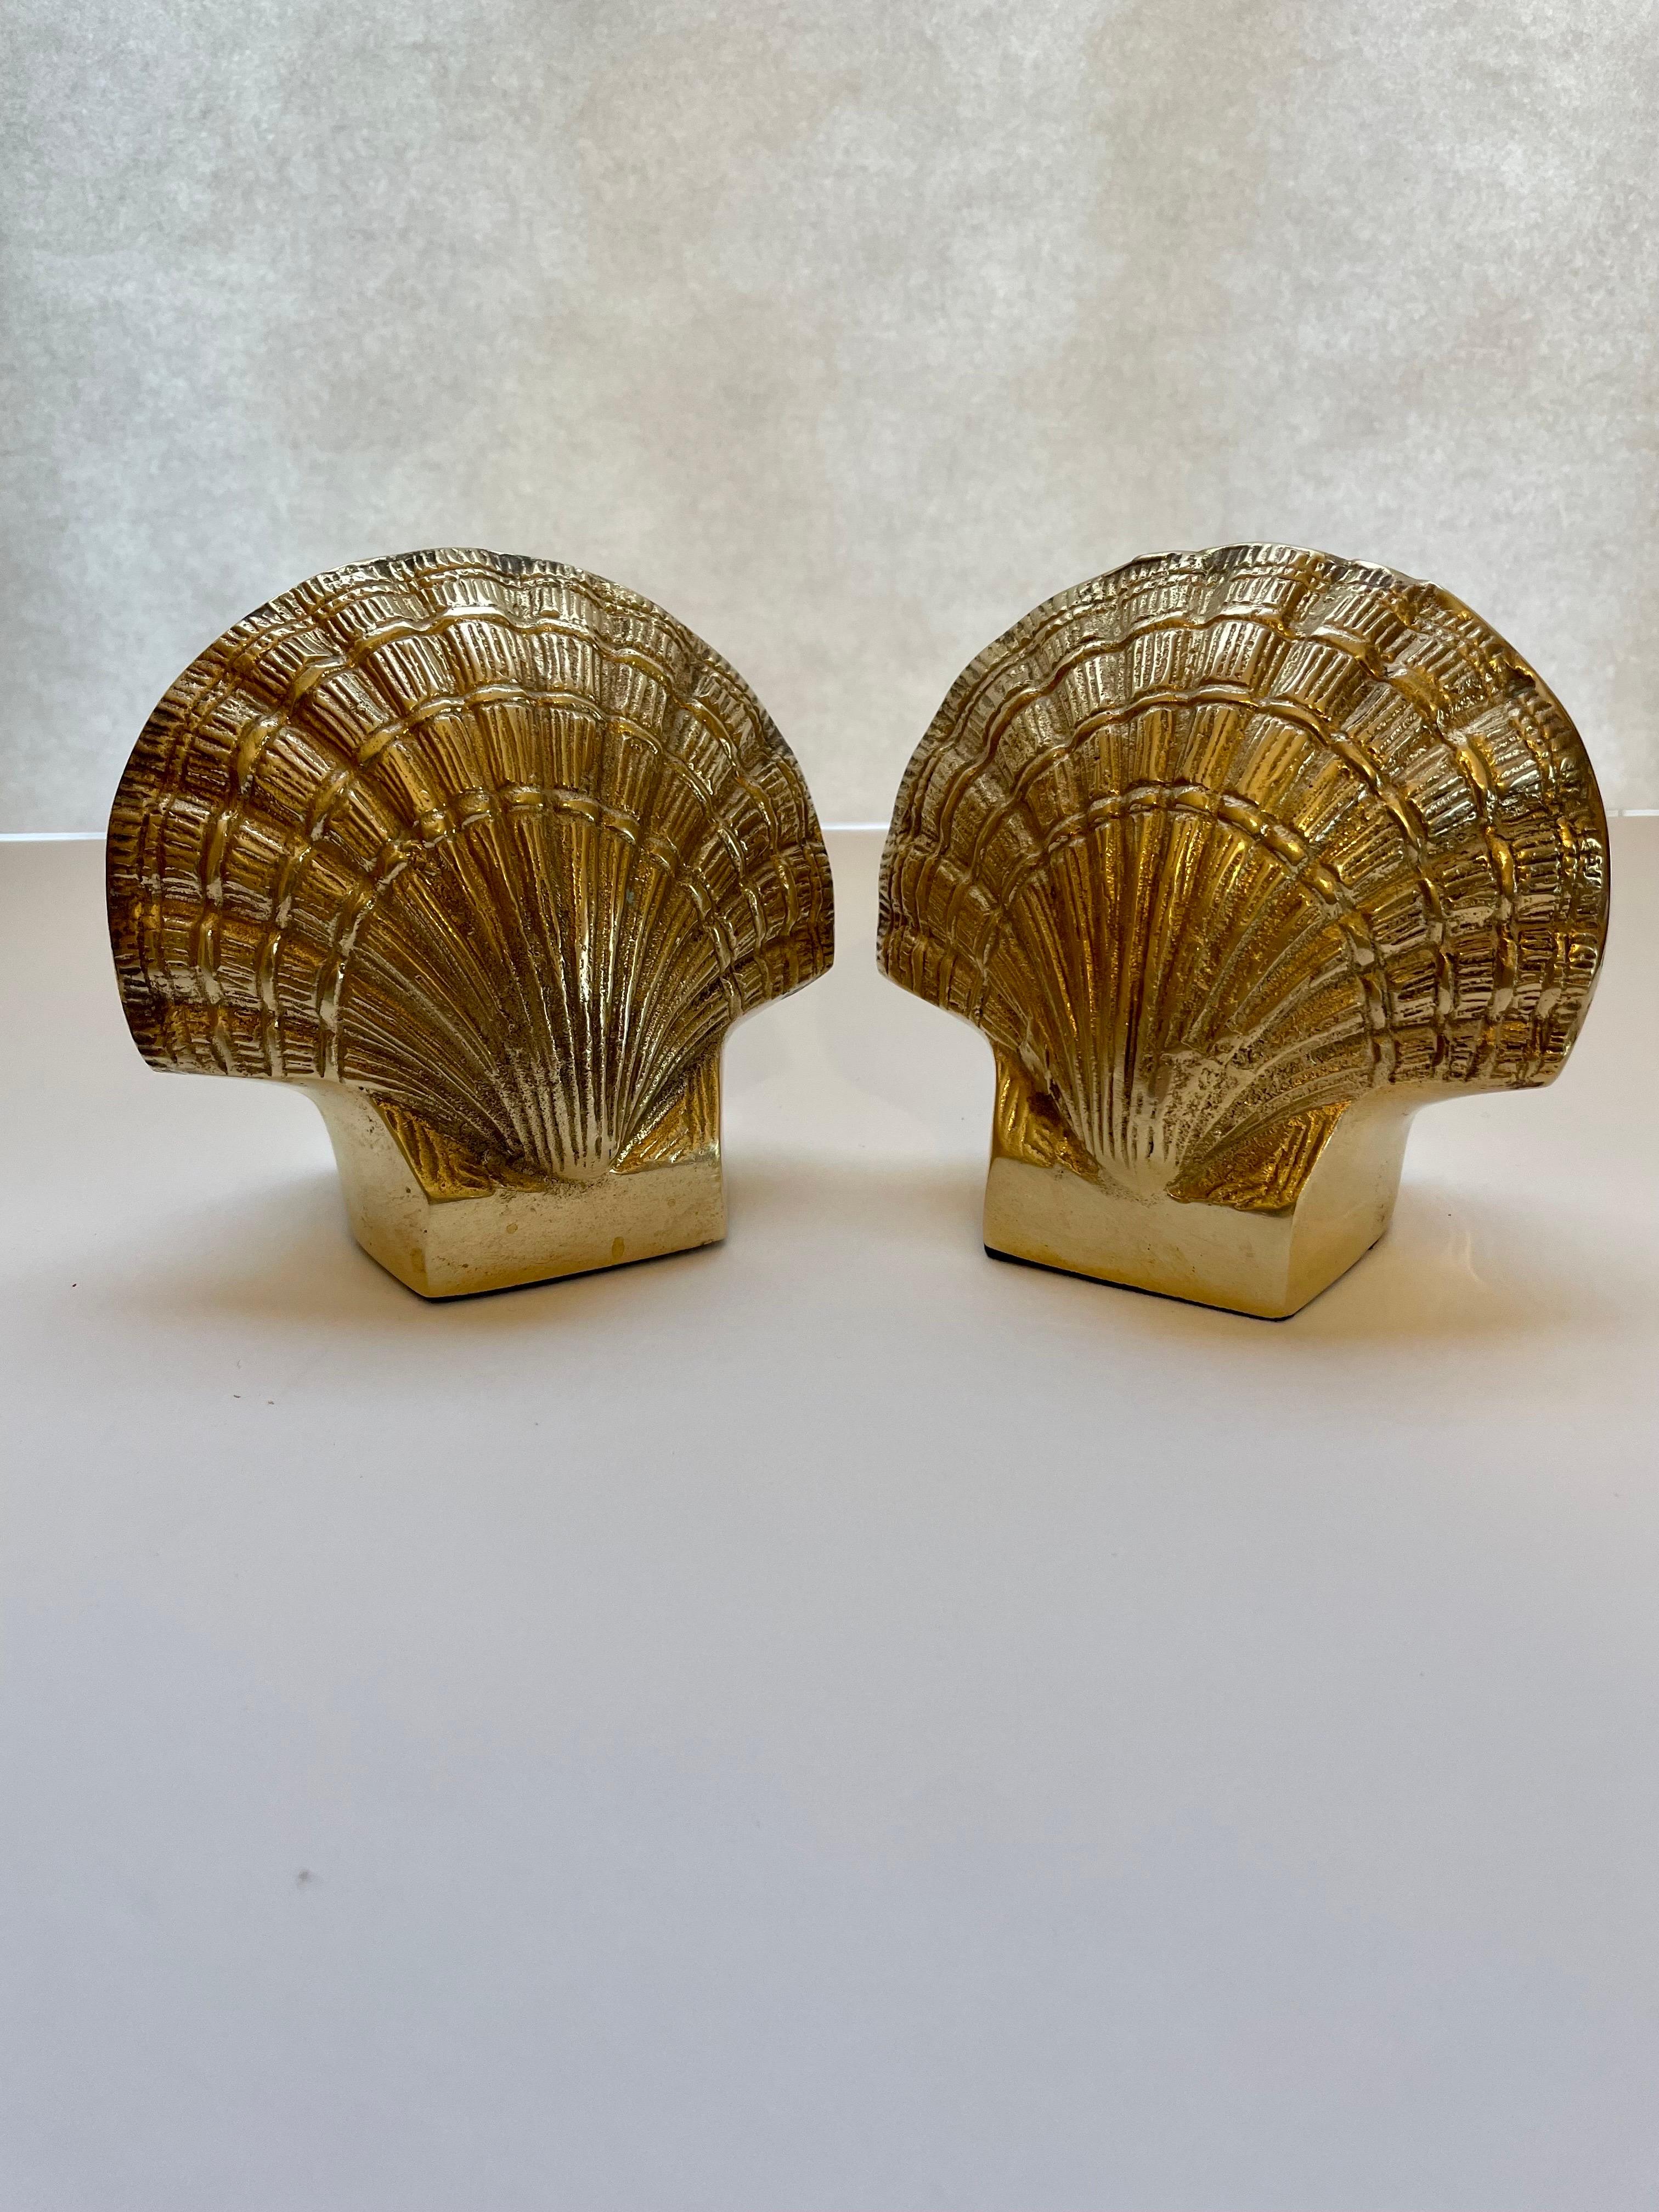 Pair brass clam shell seashell bookends. Label on bottom, marked Made in Korea Nice condition. Ready to use.